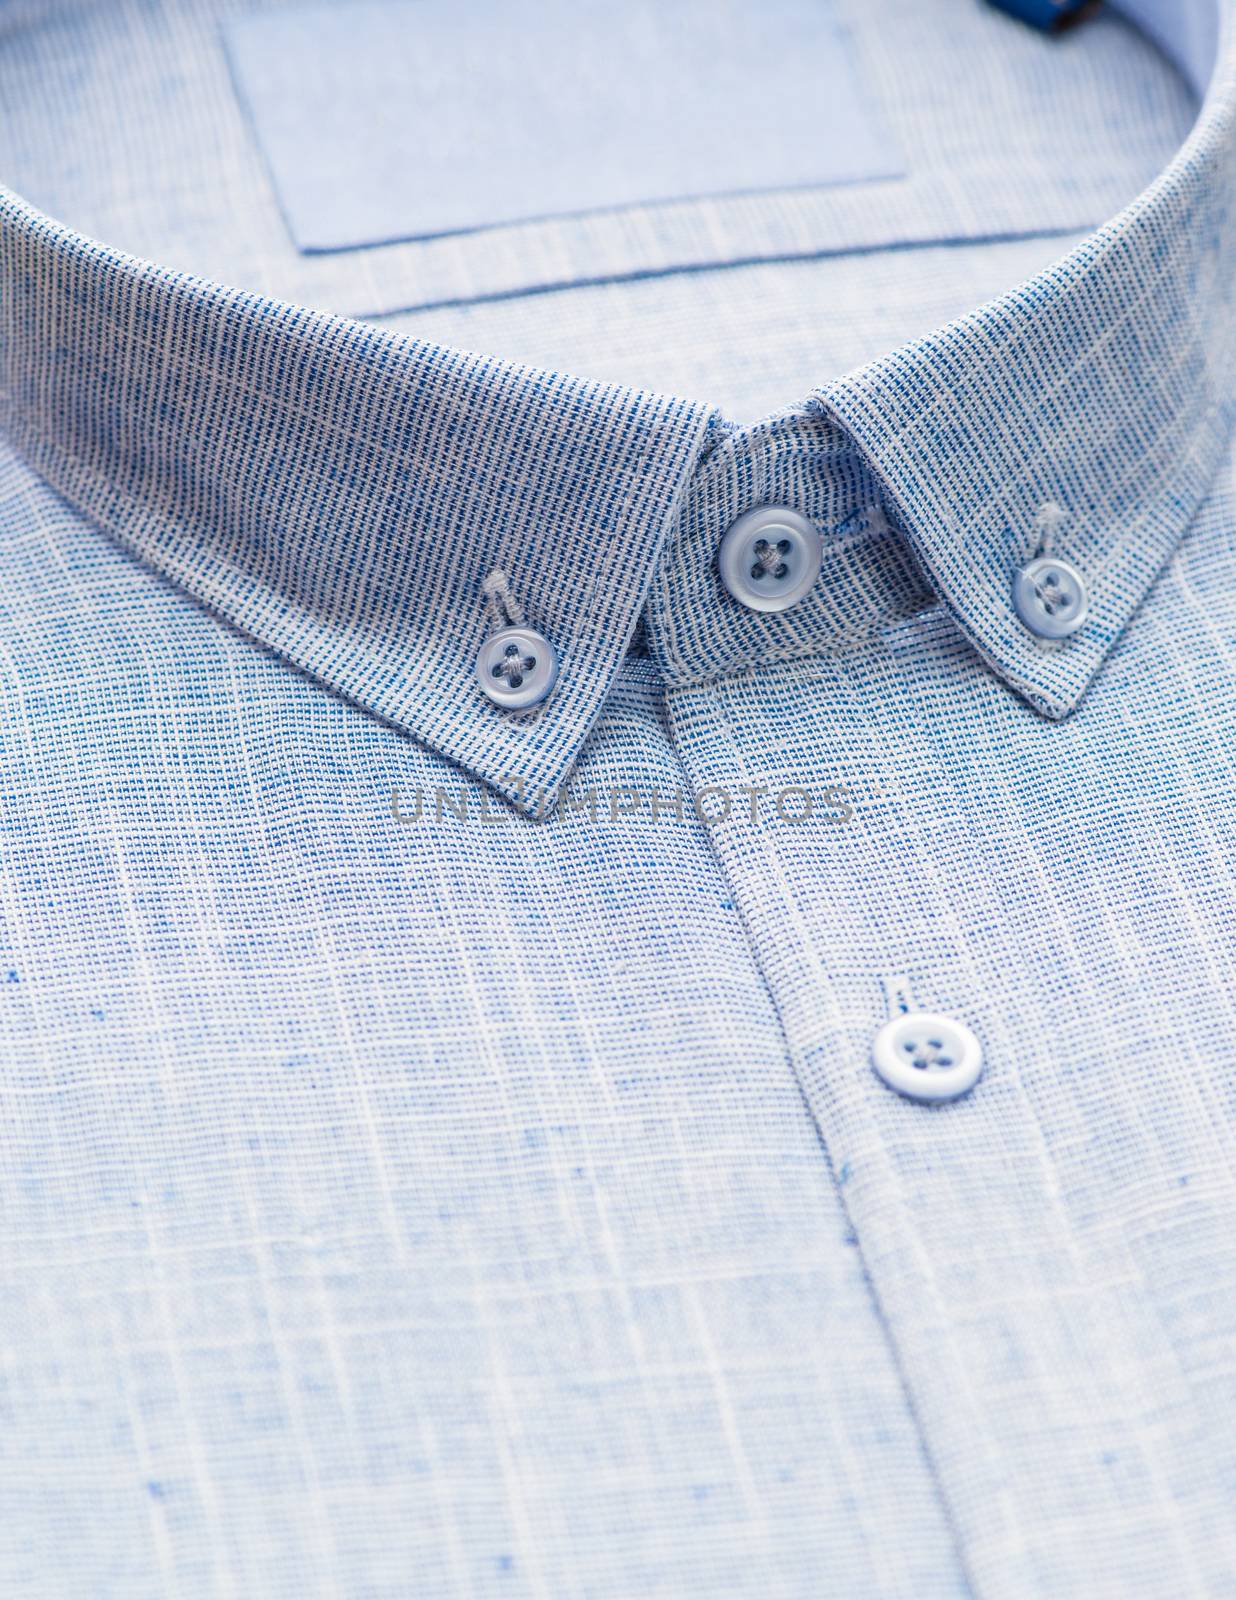 blue shirt with focus on collar and button, close-up